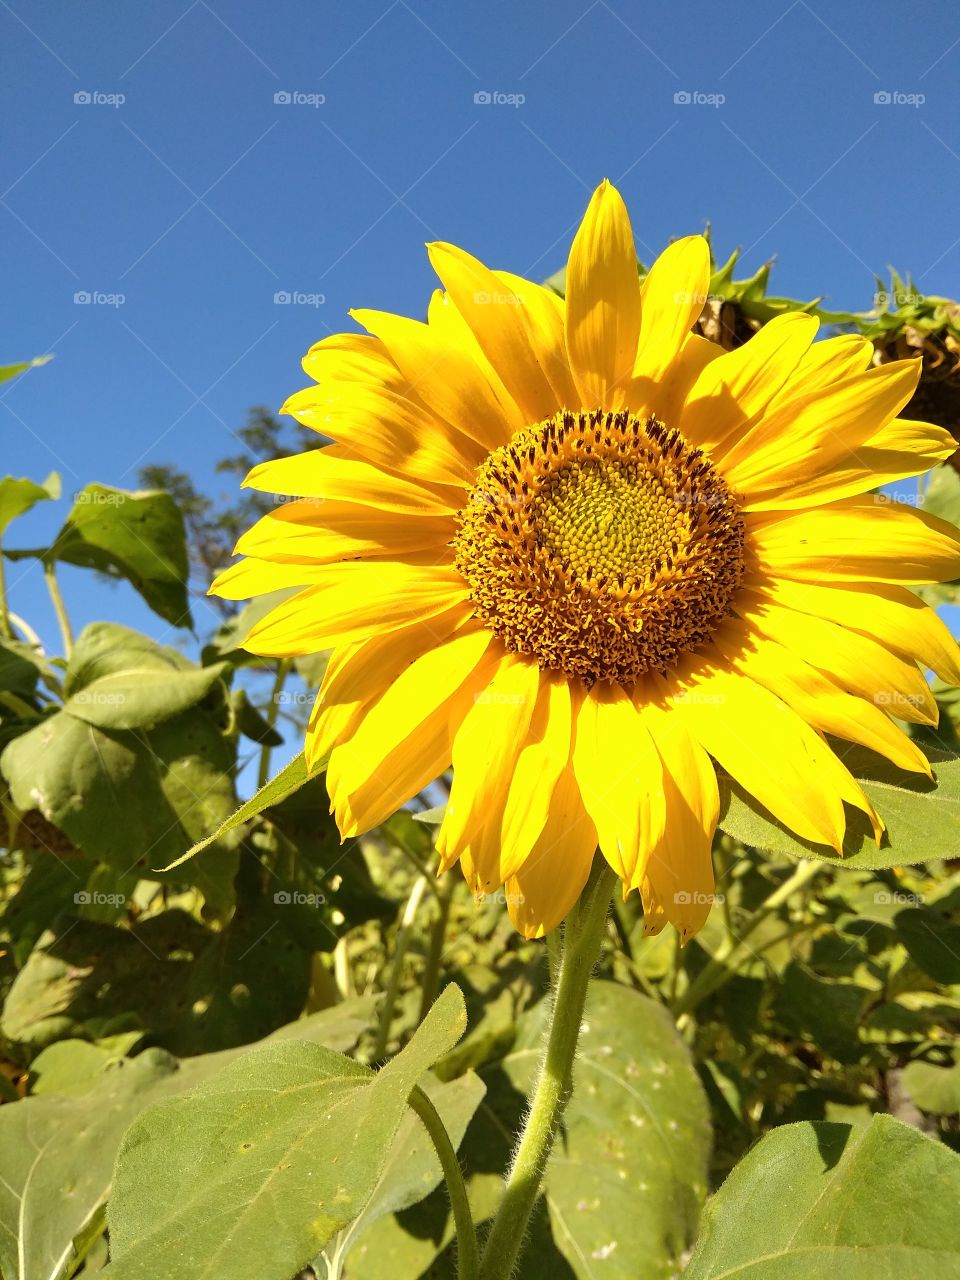 sunflower during the day